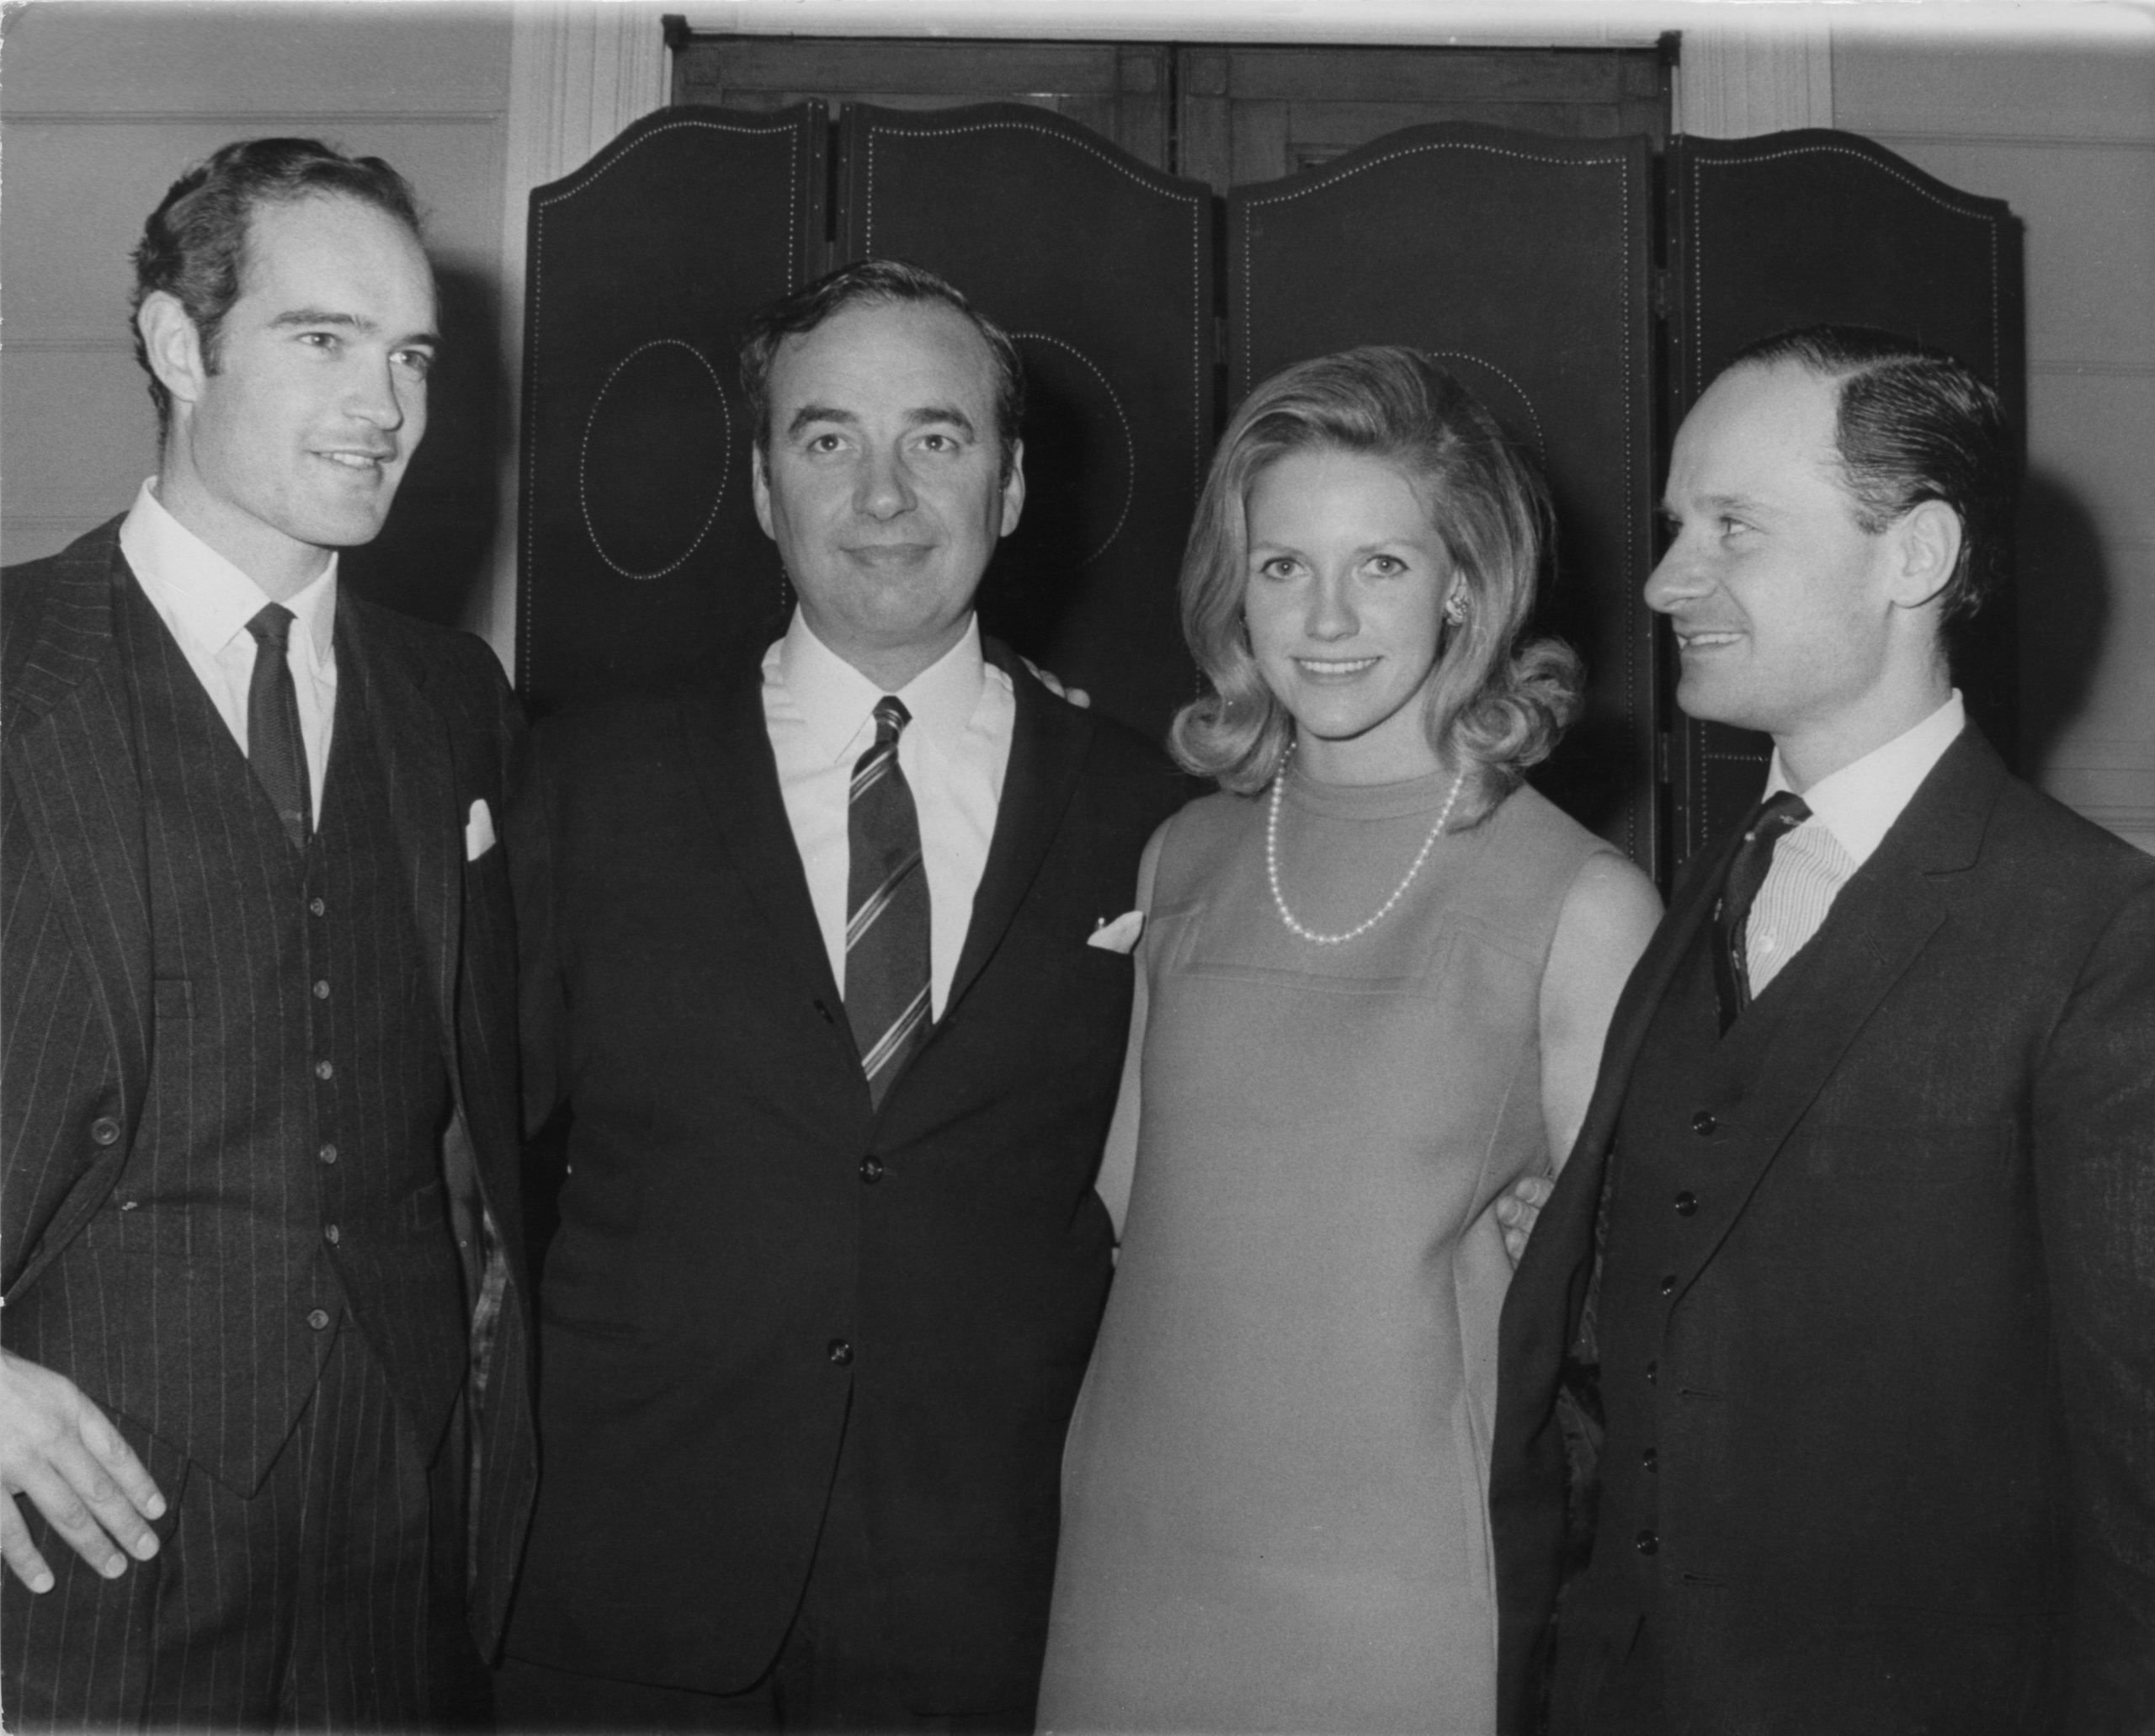 (L-R) Clive Carr, Rupert Murdoch and his wife Anna, and William Carr, during a meeting of 'News of the World' shareholders in London, 2nd January 1969. (Photo by Michael Webb/Keystone/Hulton Archive/Getty Images)